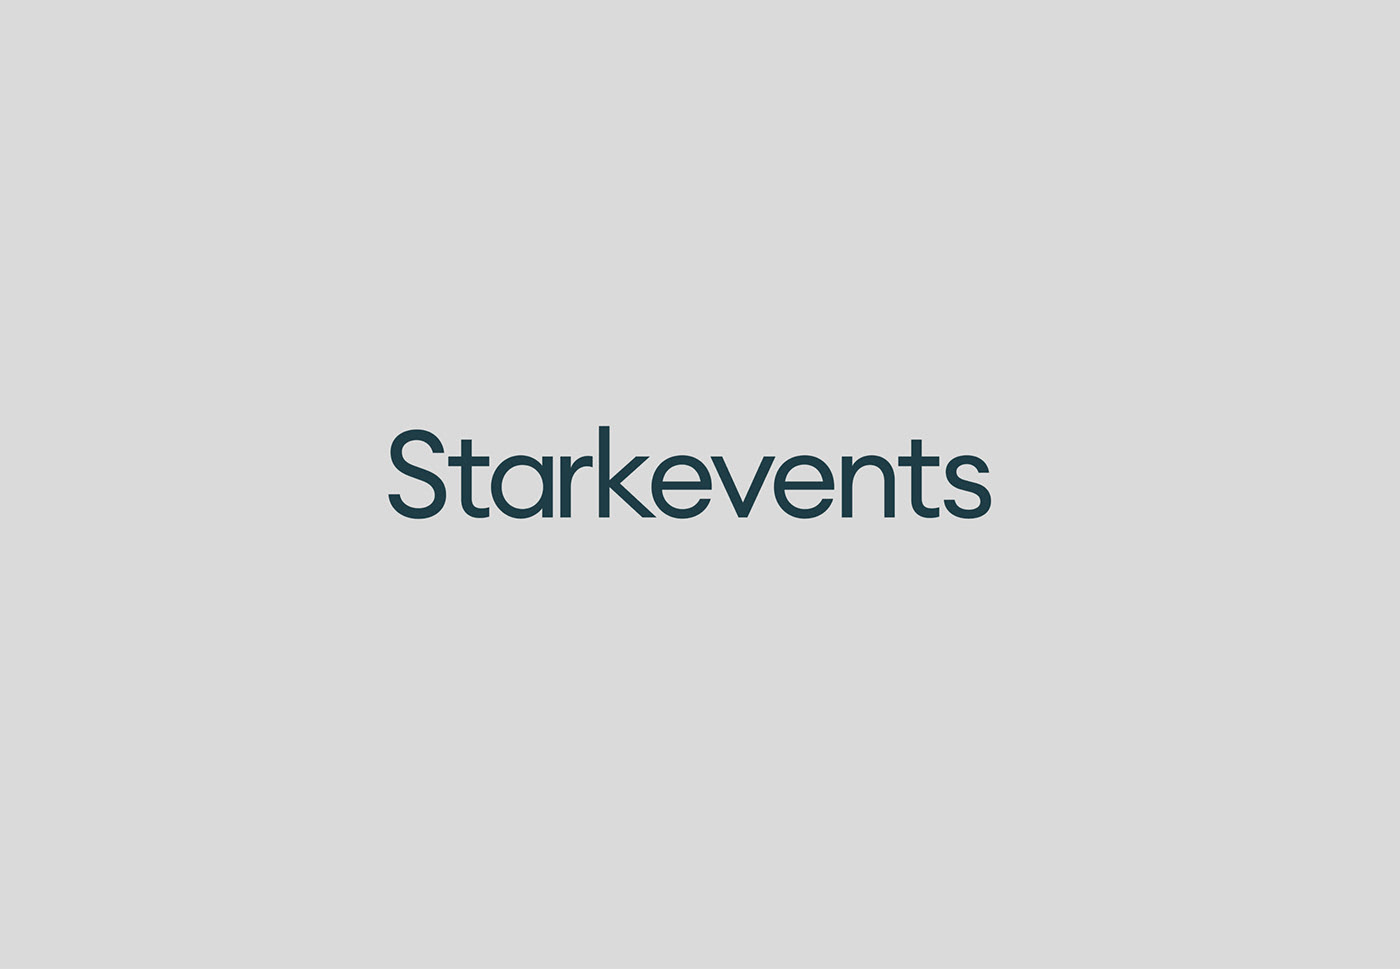 design Events events management graphicdesign identity logo marque shapes type Typeface